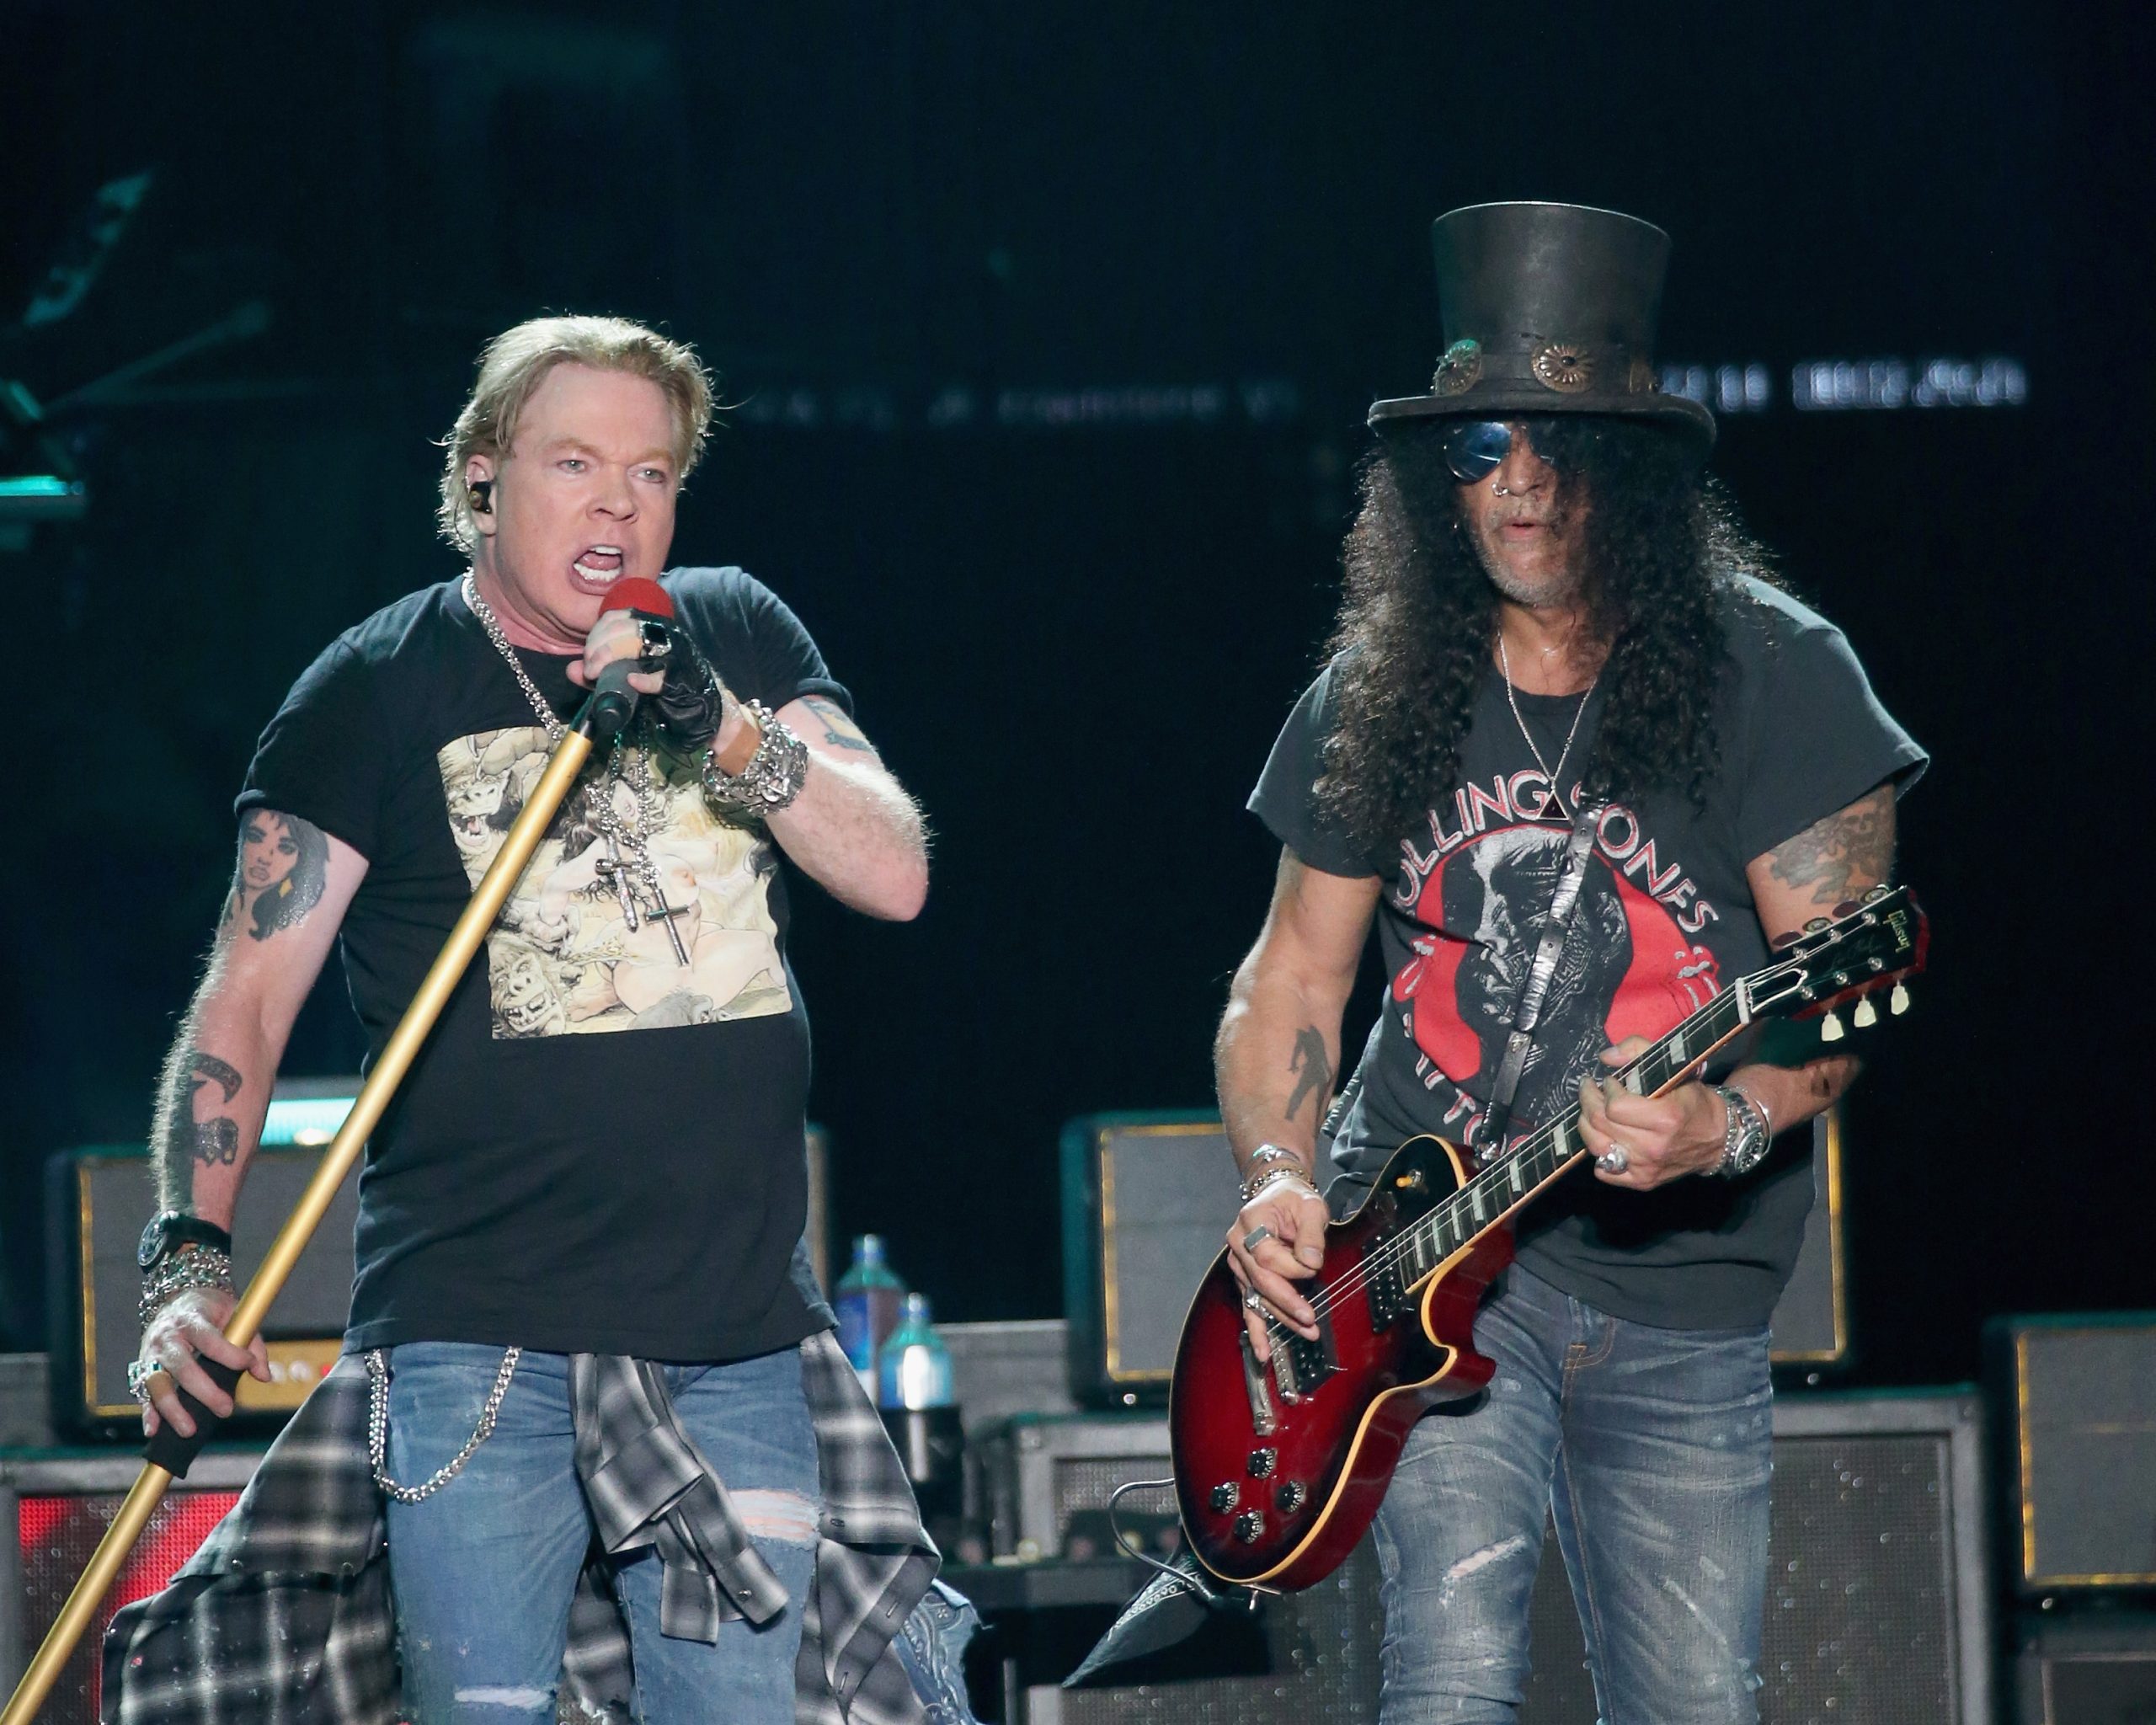 AUSTIN, TEXAS - OCTOBER 04:  Axl Rose (L) and Slash of Guns N' Roses perform in concert during weekend one of the 2019 ACL Fest at Zilker Park on October 4, 2019 in Austin, Texas.  (Photo by Gary Miller/Getty Images)